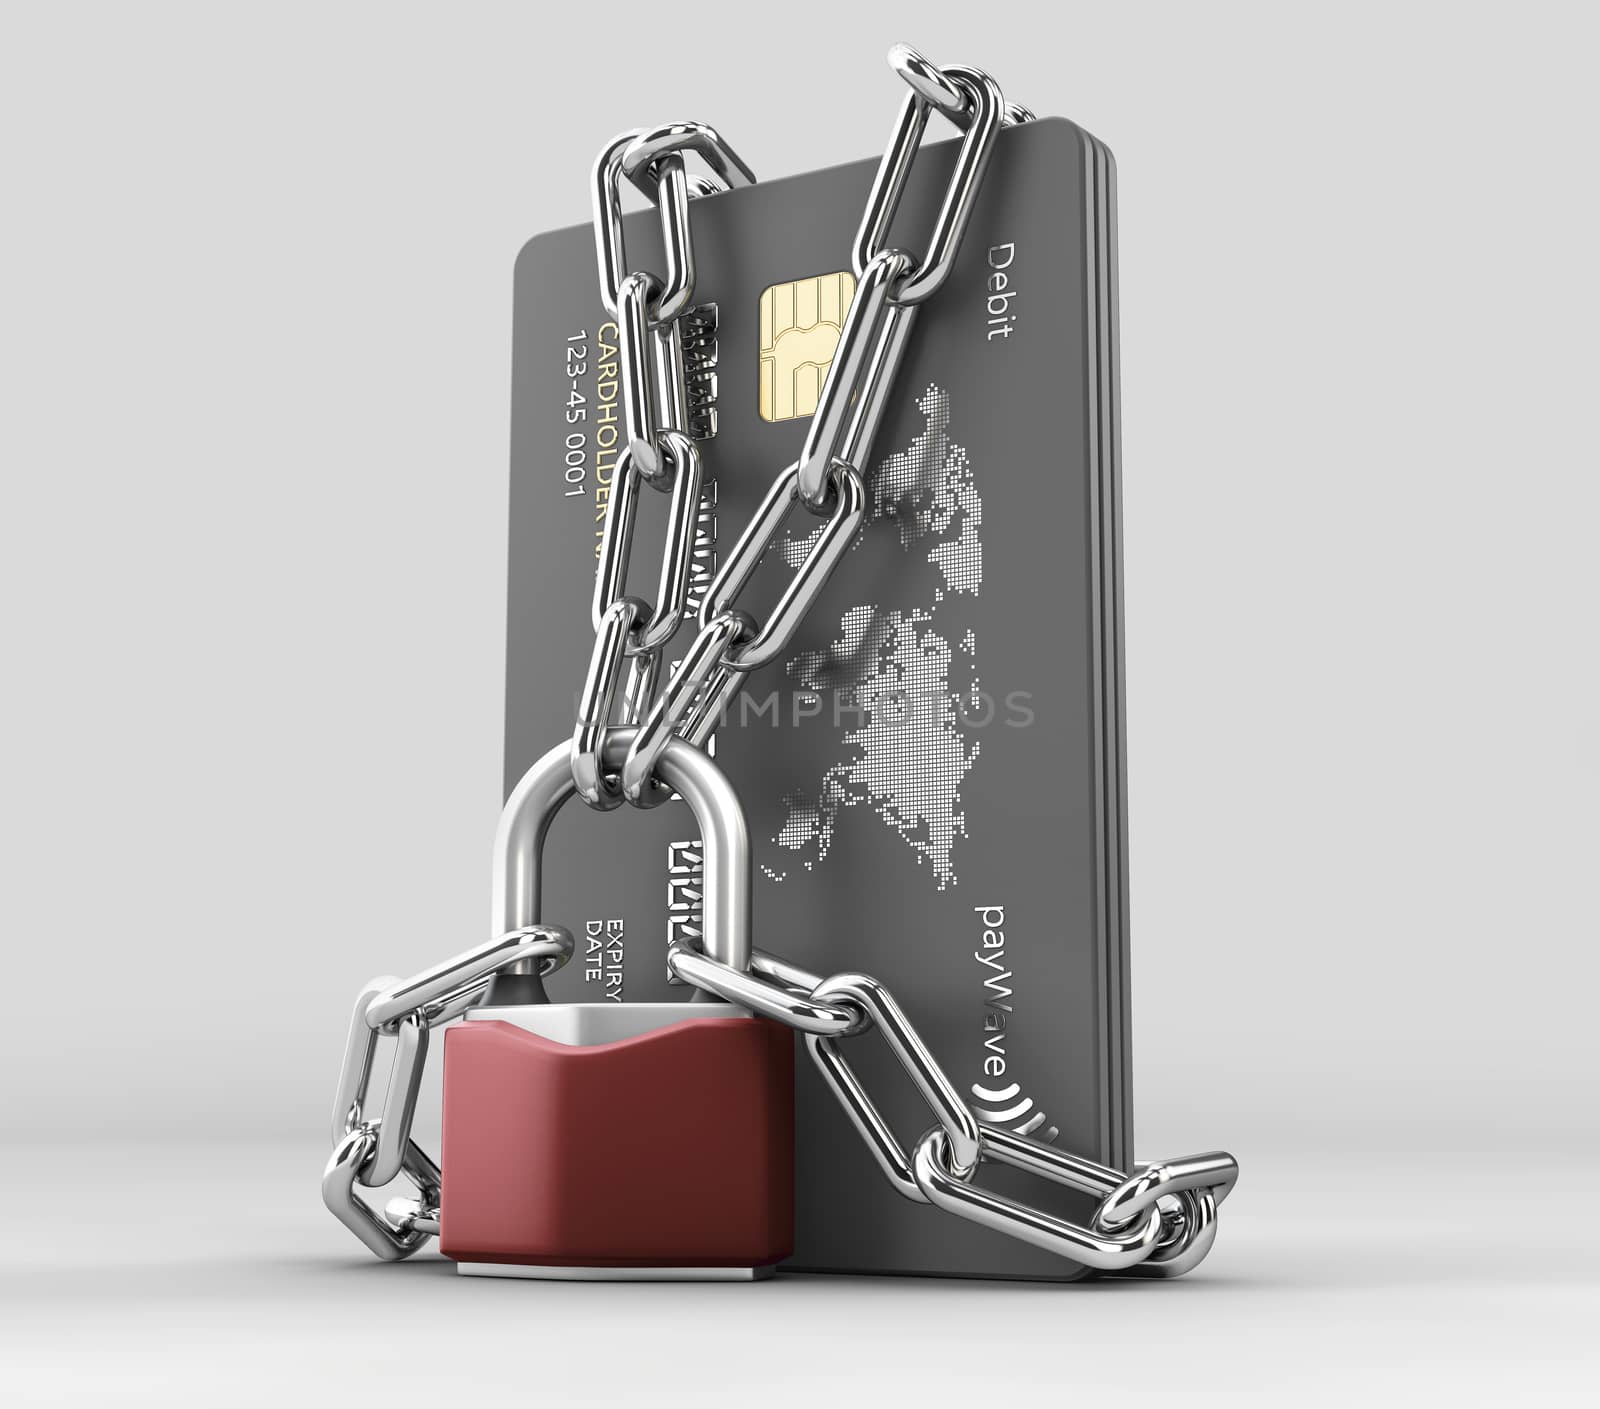 3d rendering of credit card with chains and pad lock, cplipping path included by tussik